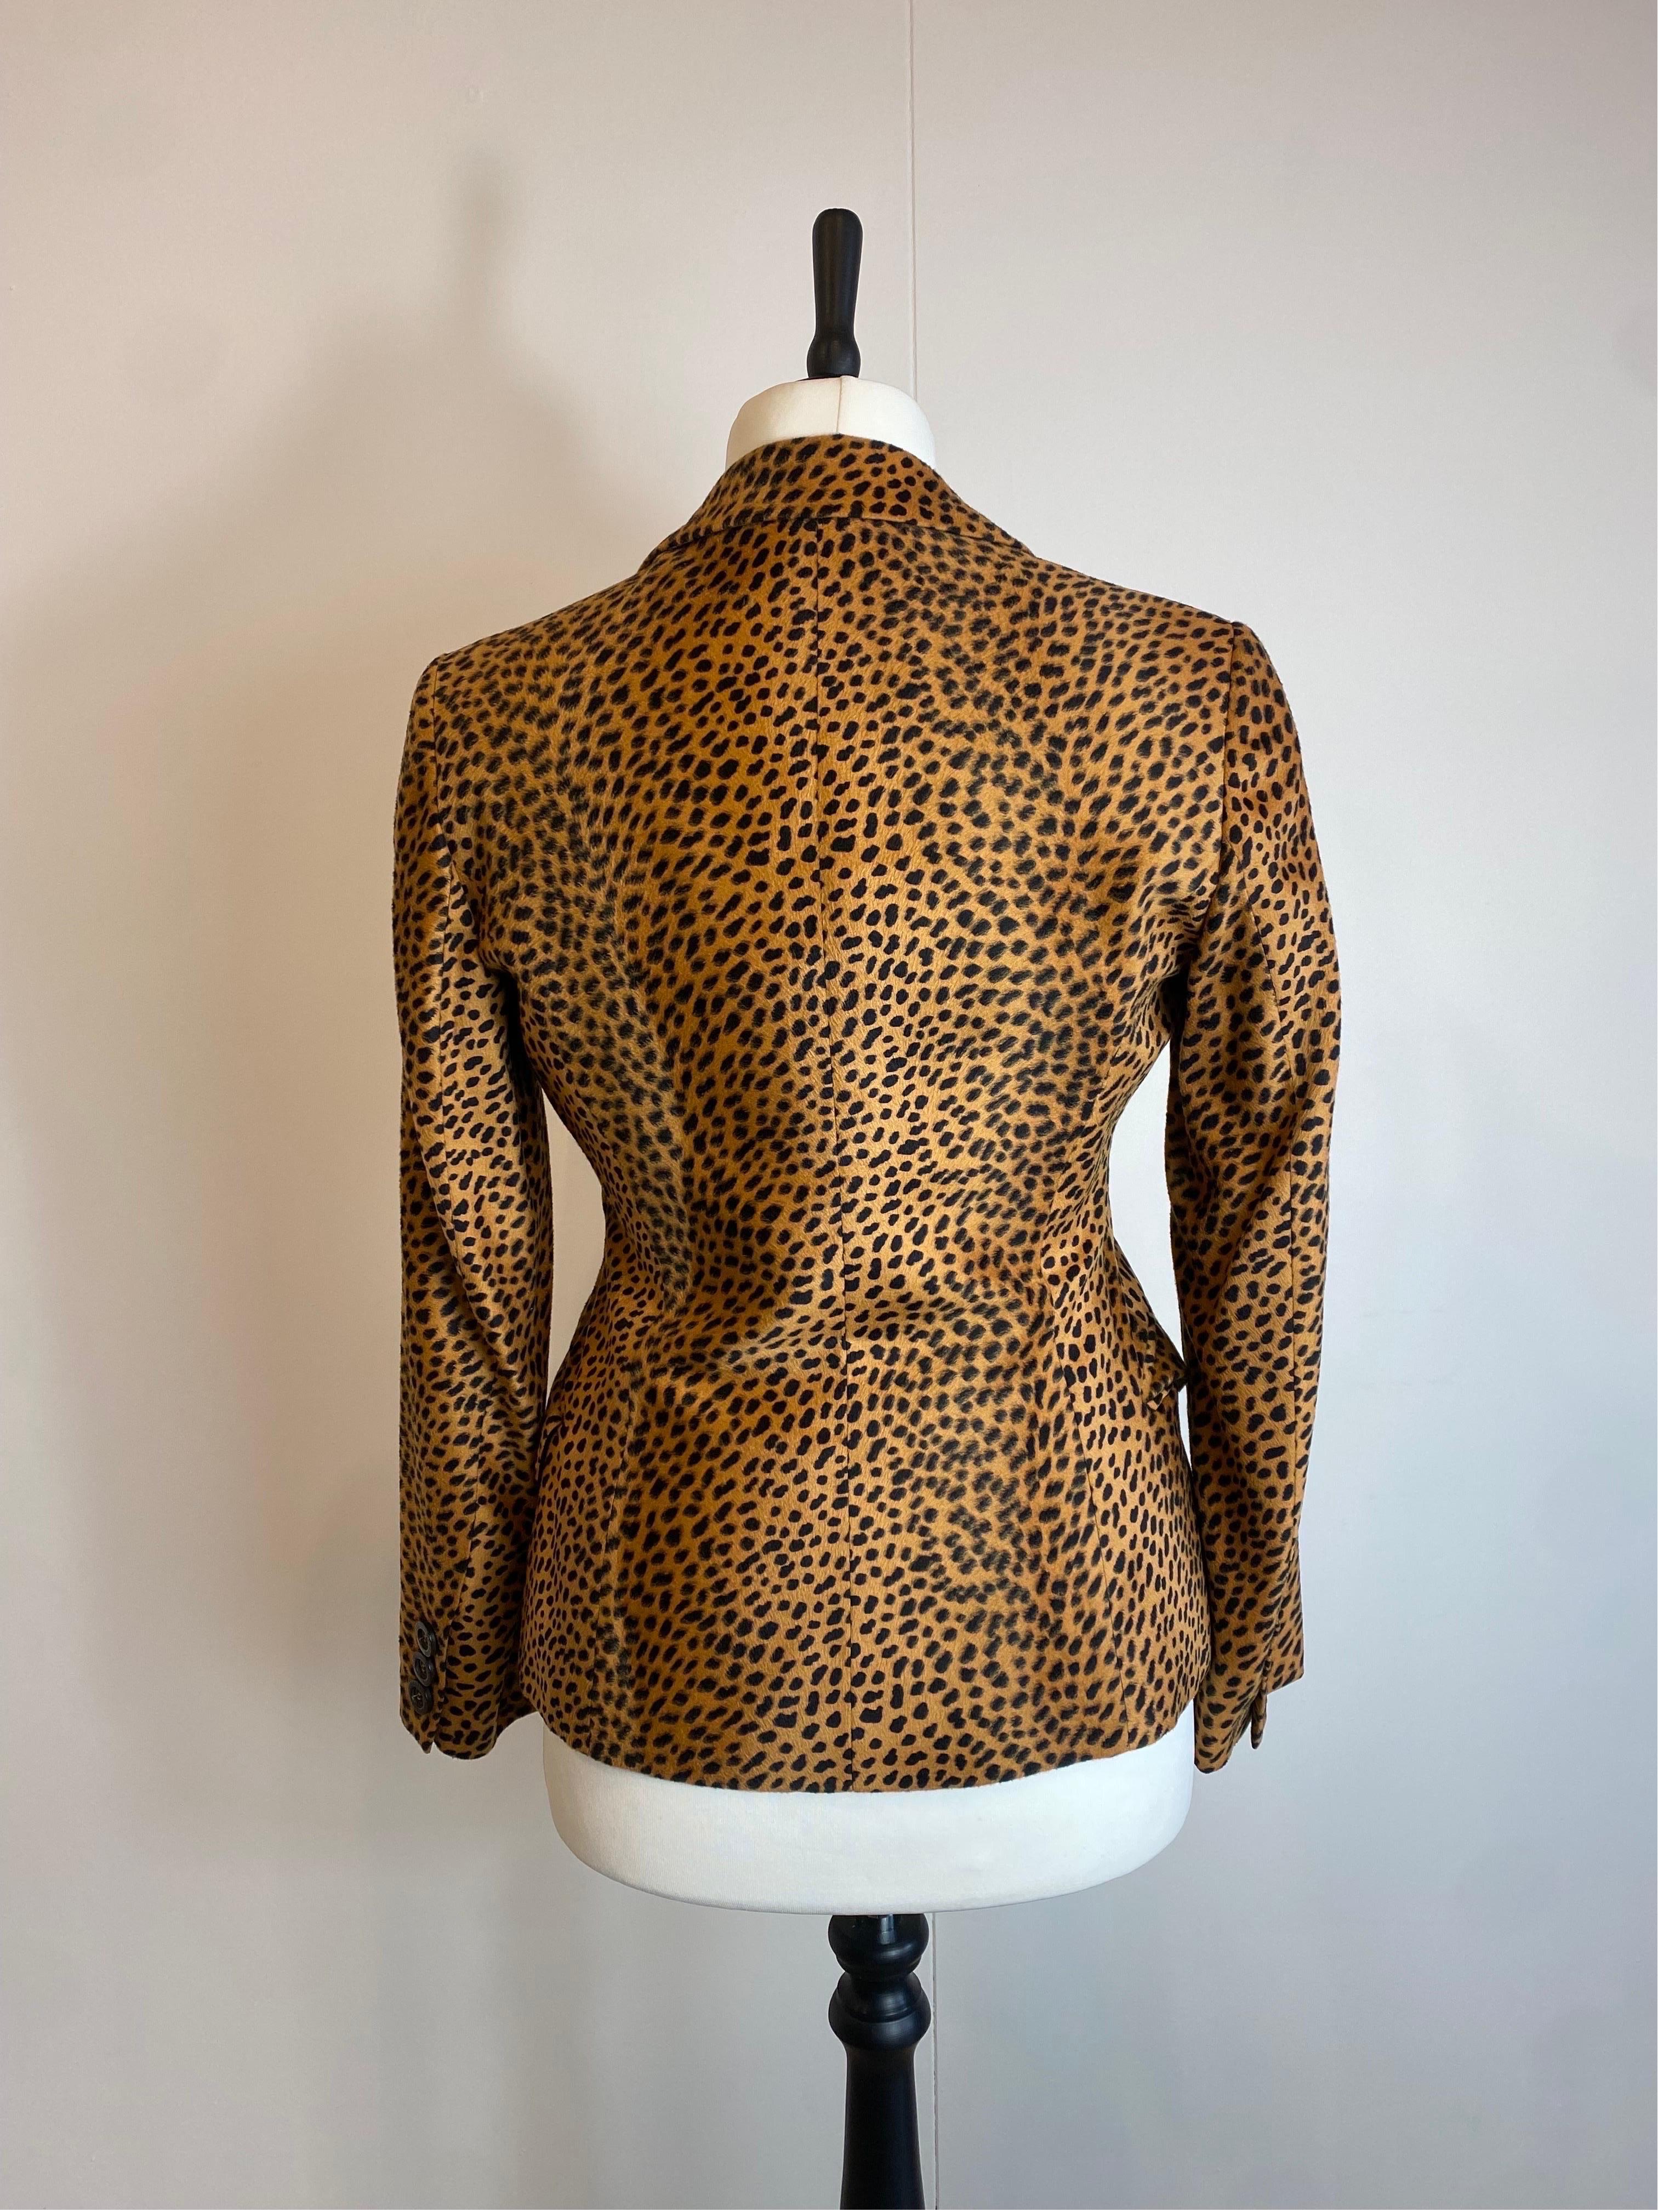 Moschino Jeans Leopard Blazer In Excellent Condition For Sale In Carnate, IT